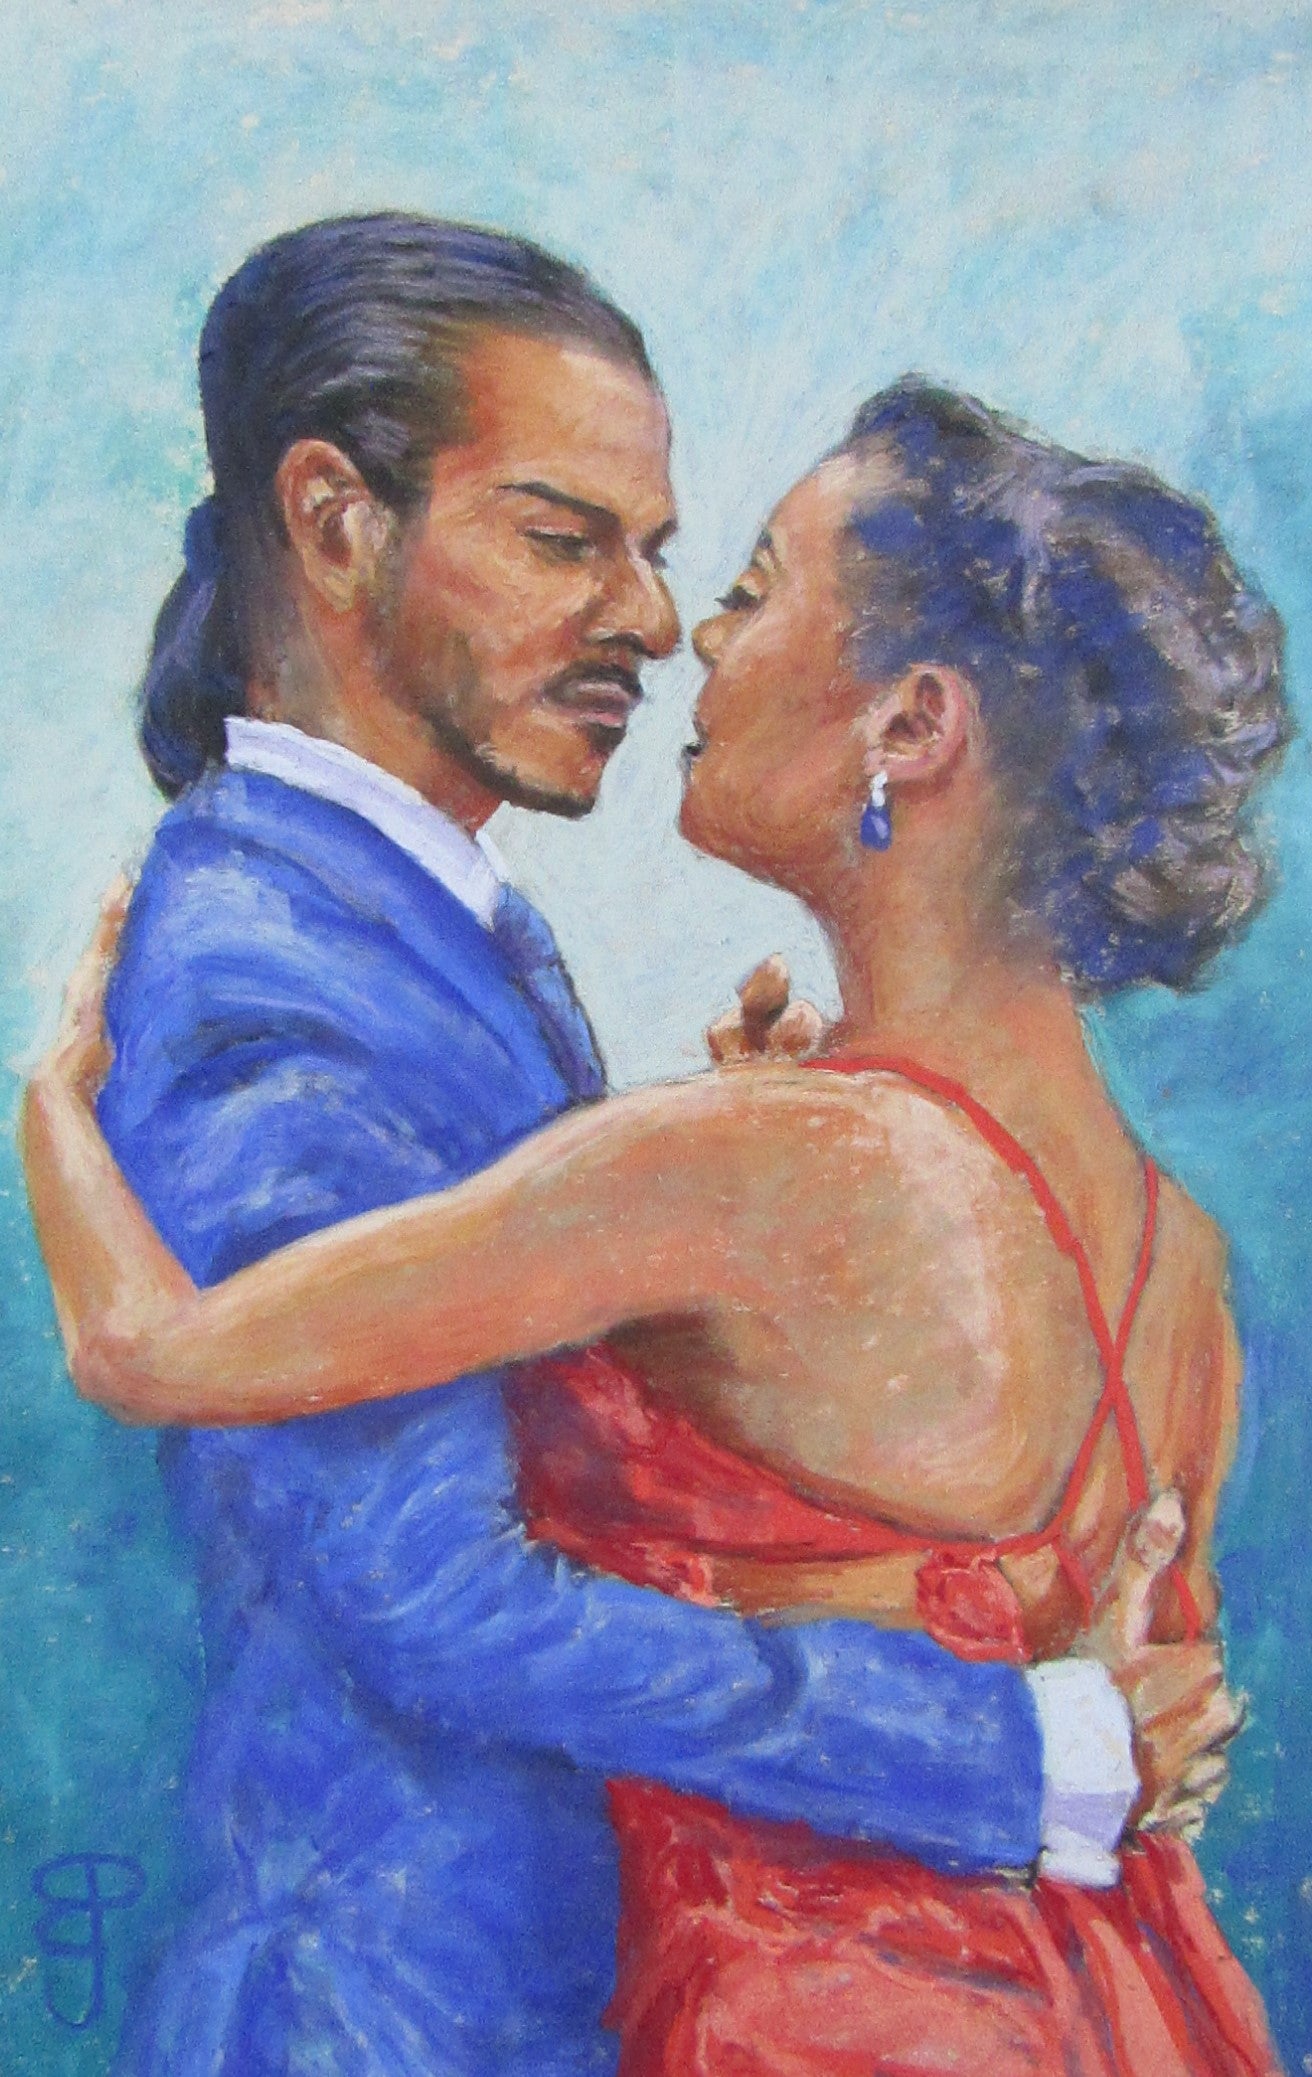 A pastel painting of two young tango dancers